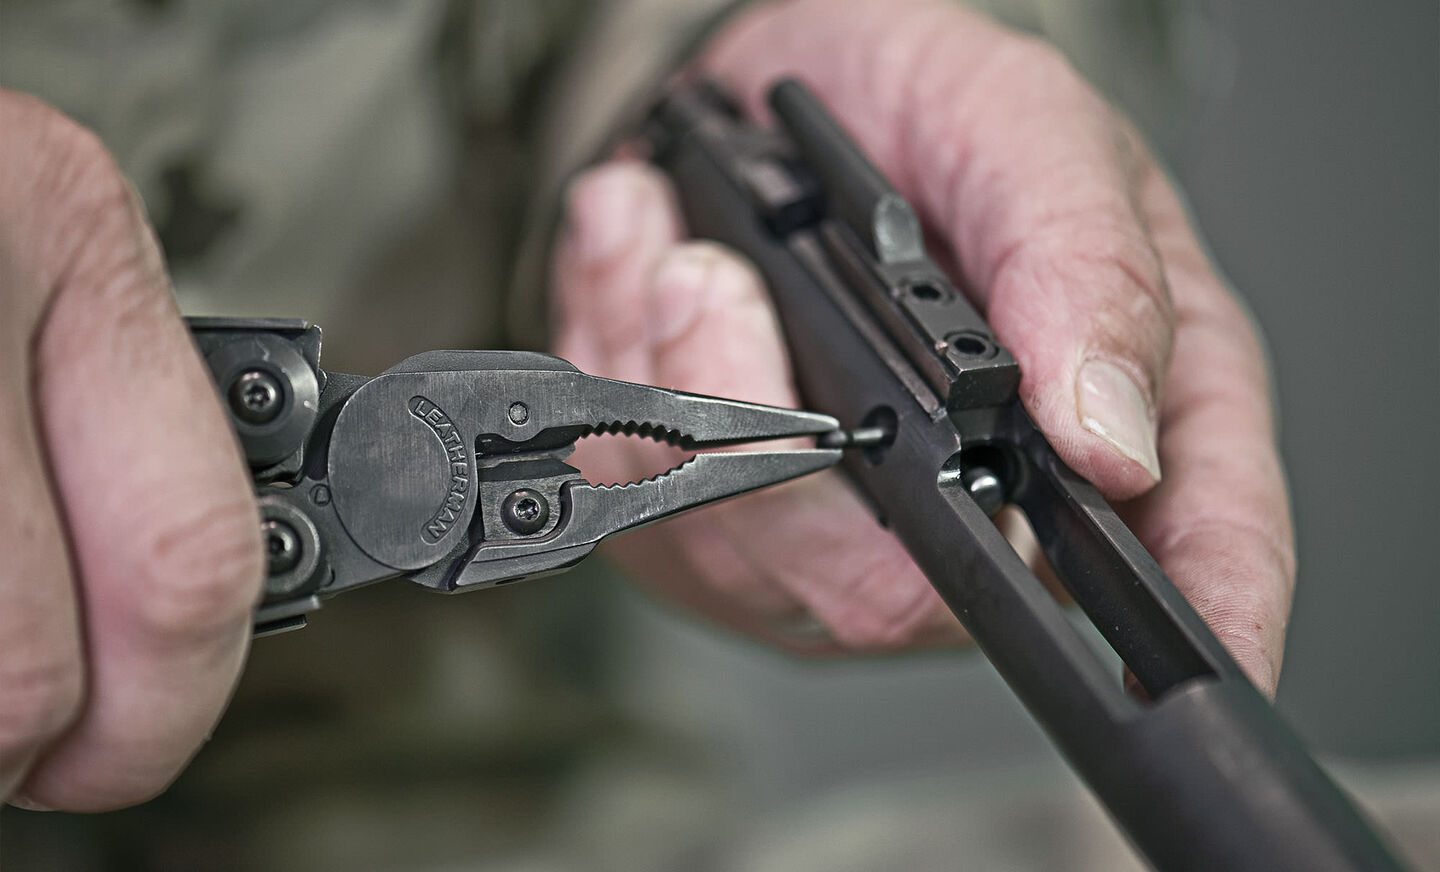 Using the Leatherman MUT pliers